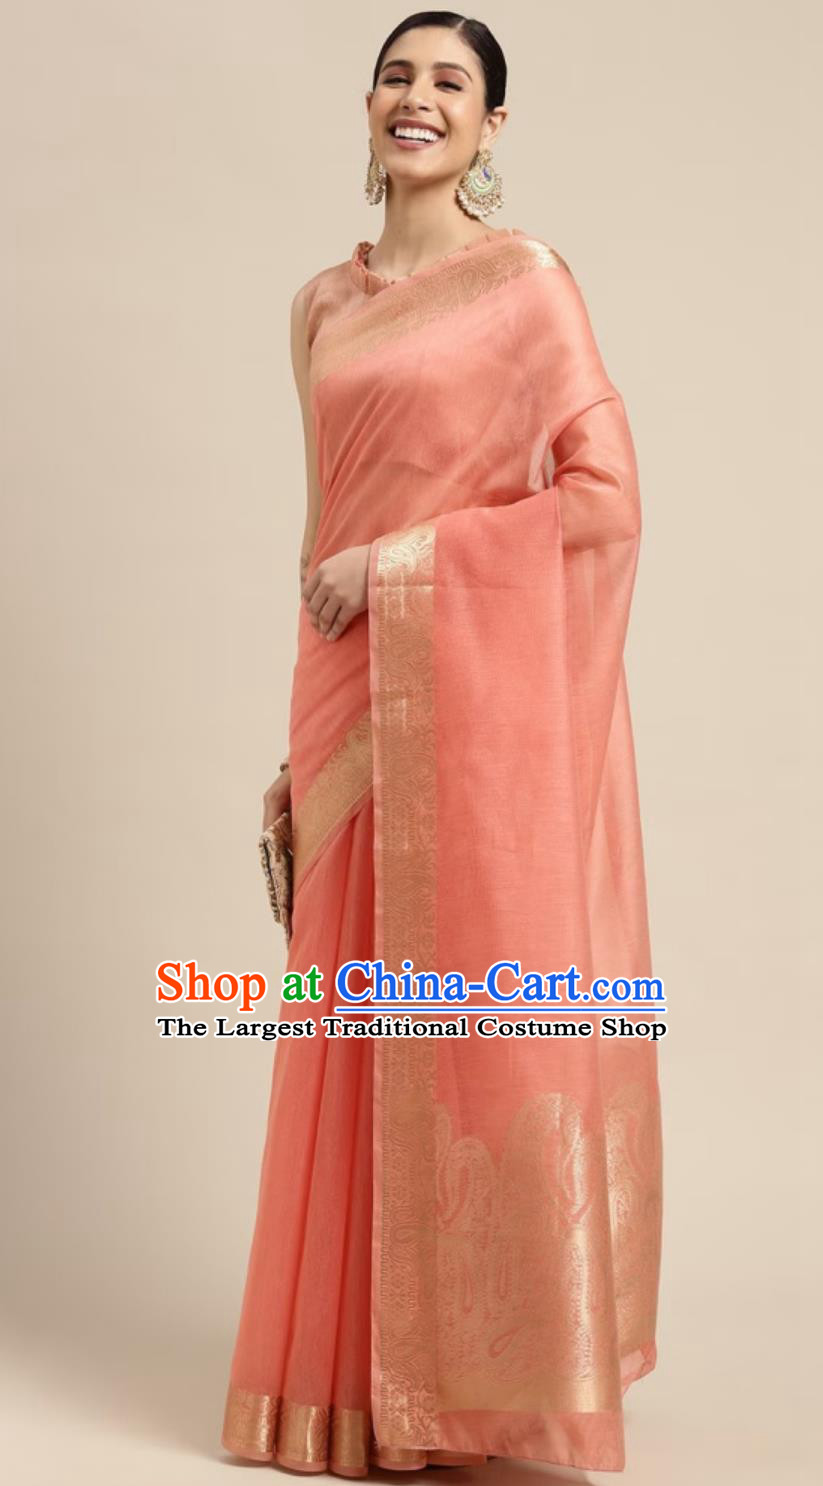 Traditional Festival Pink Sari Dress India Woman Costume Indian National Clothing